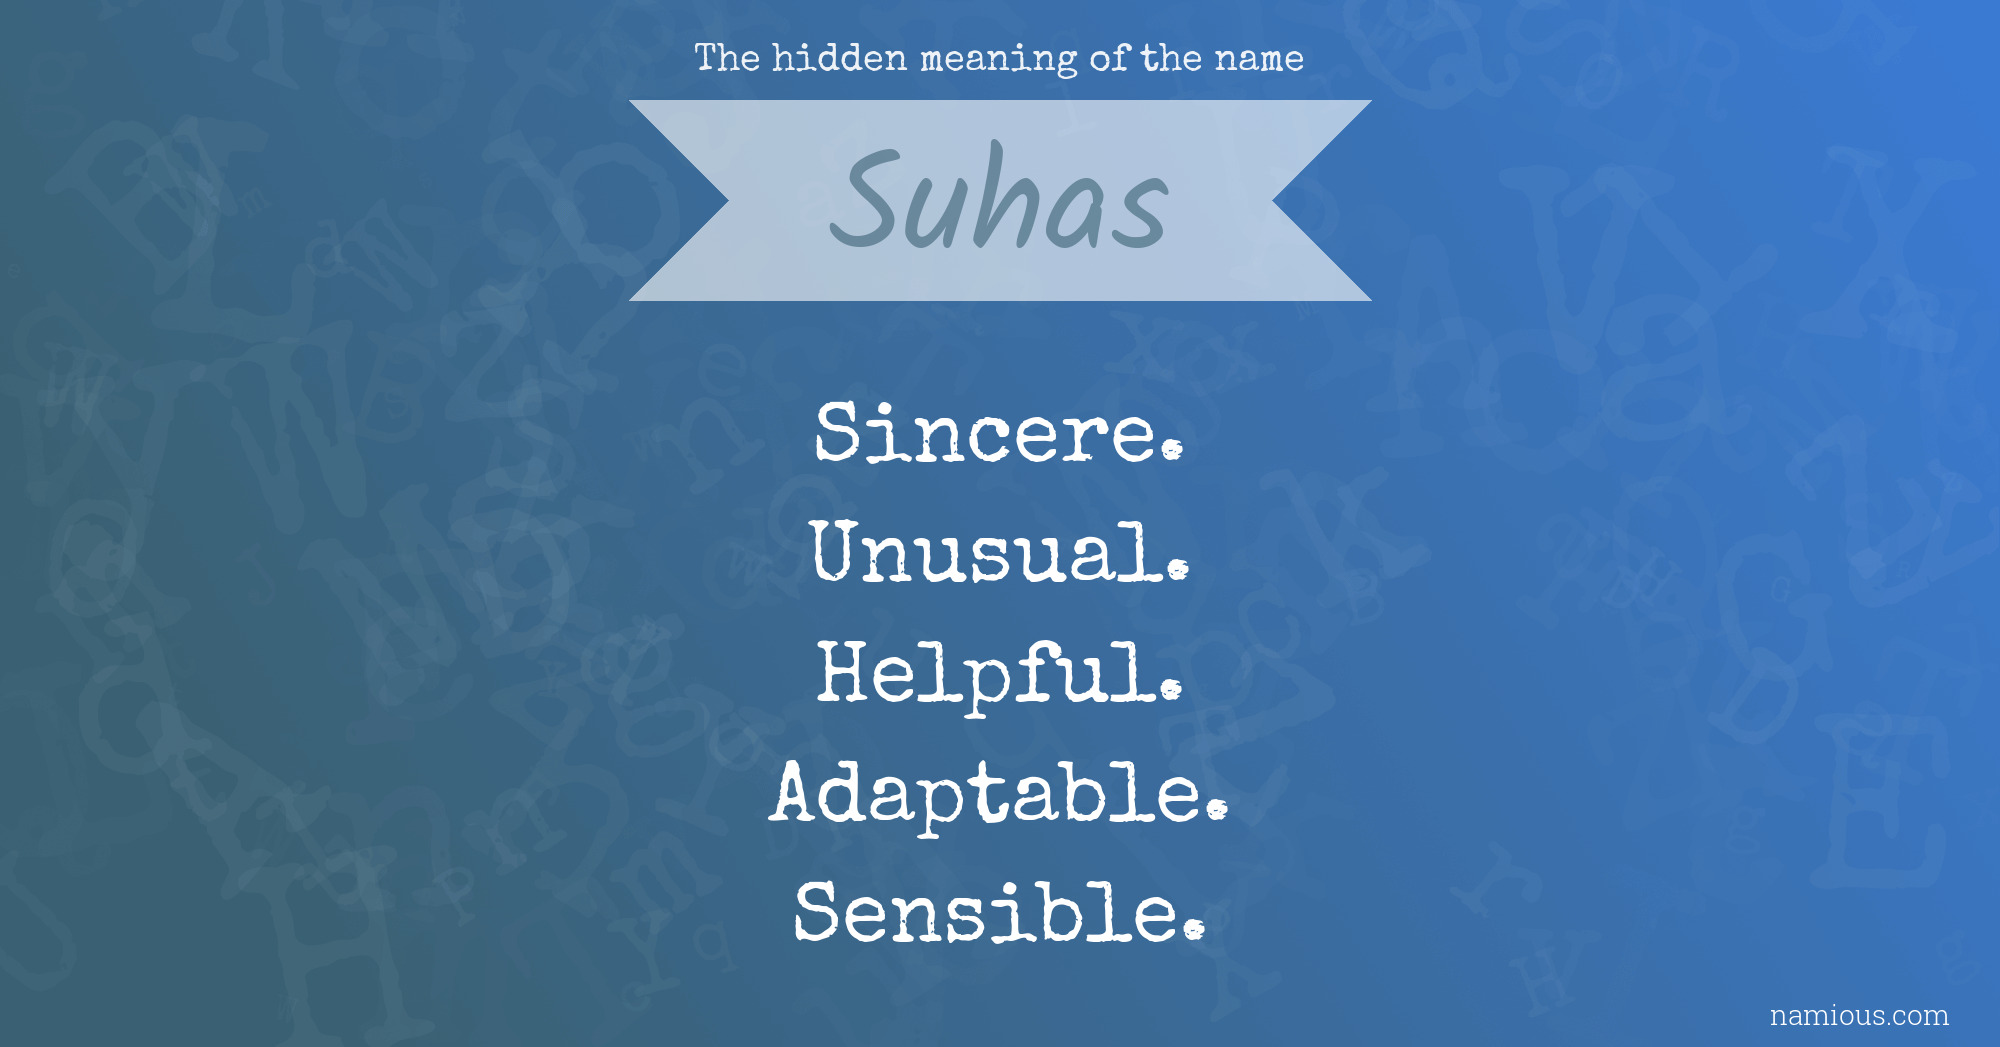 The hidden meaning of the name Suhas